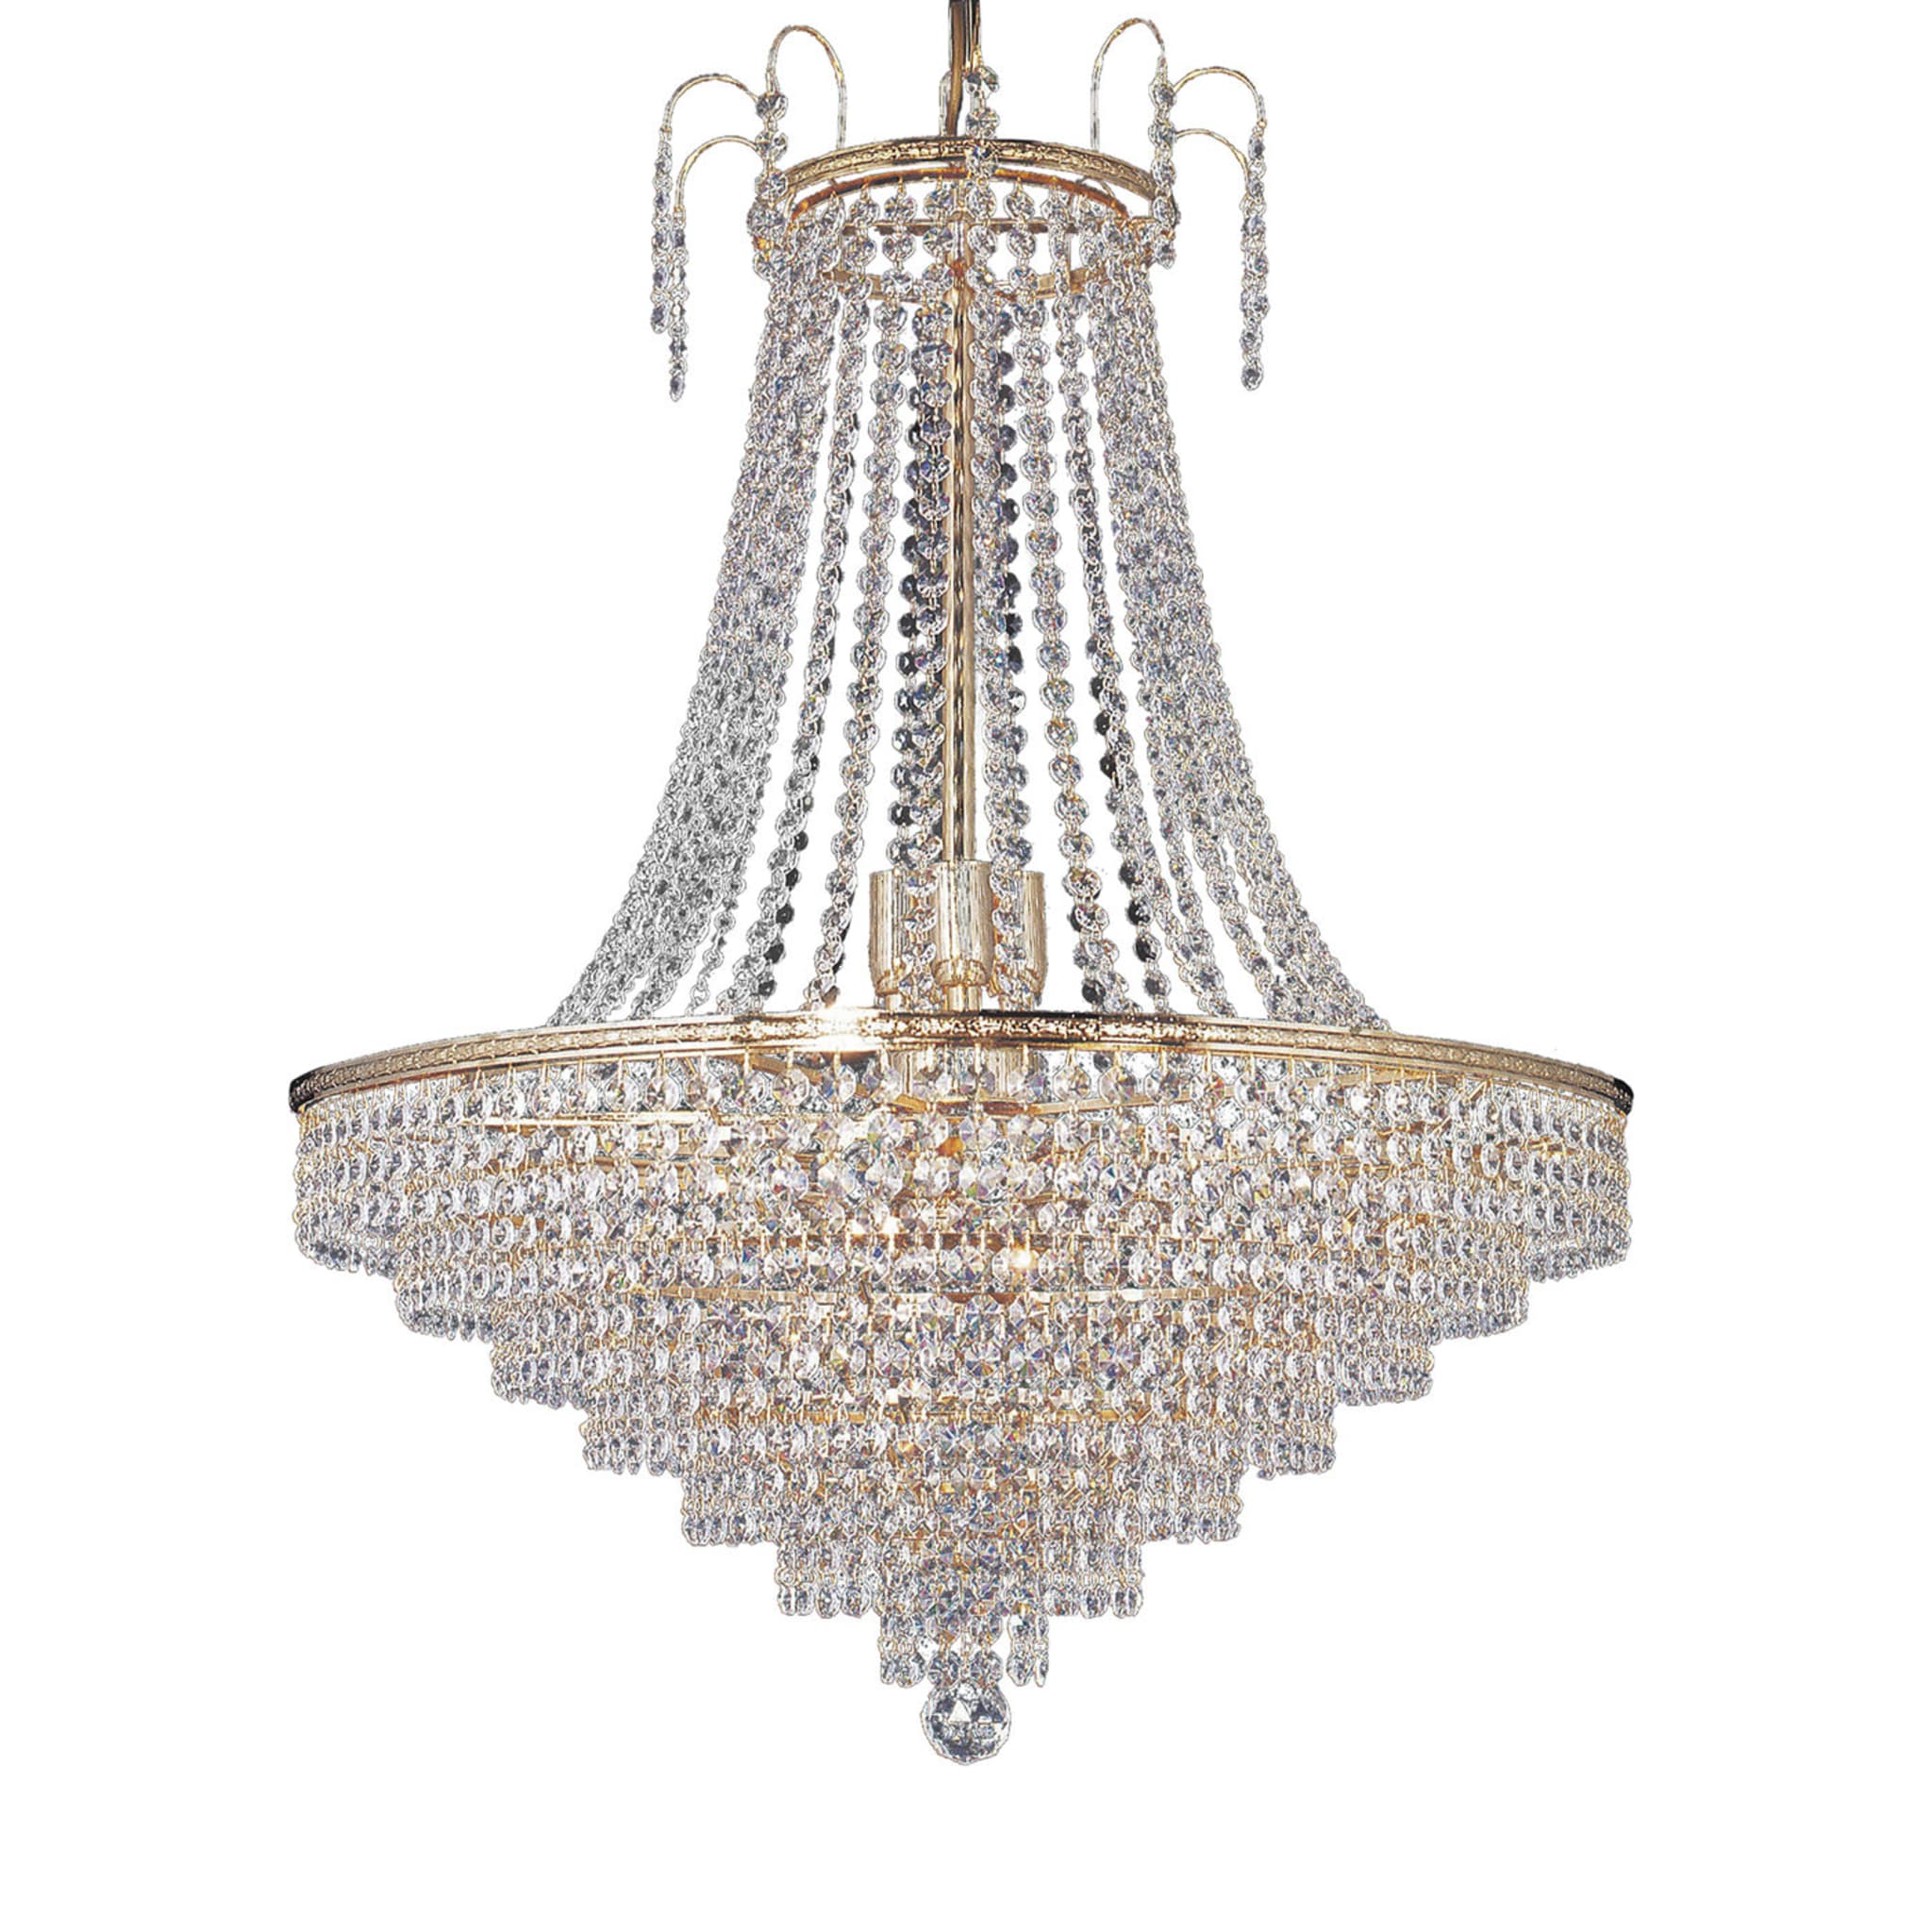 Impero 15-Light Chandelier - Main view